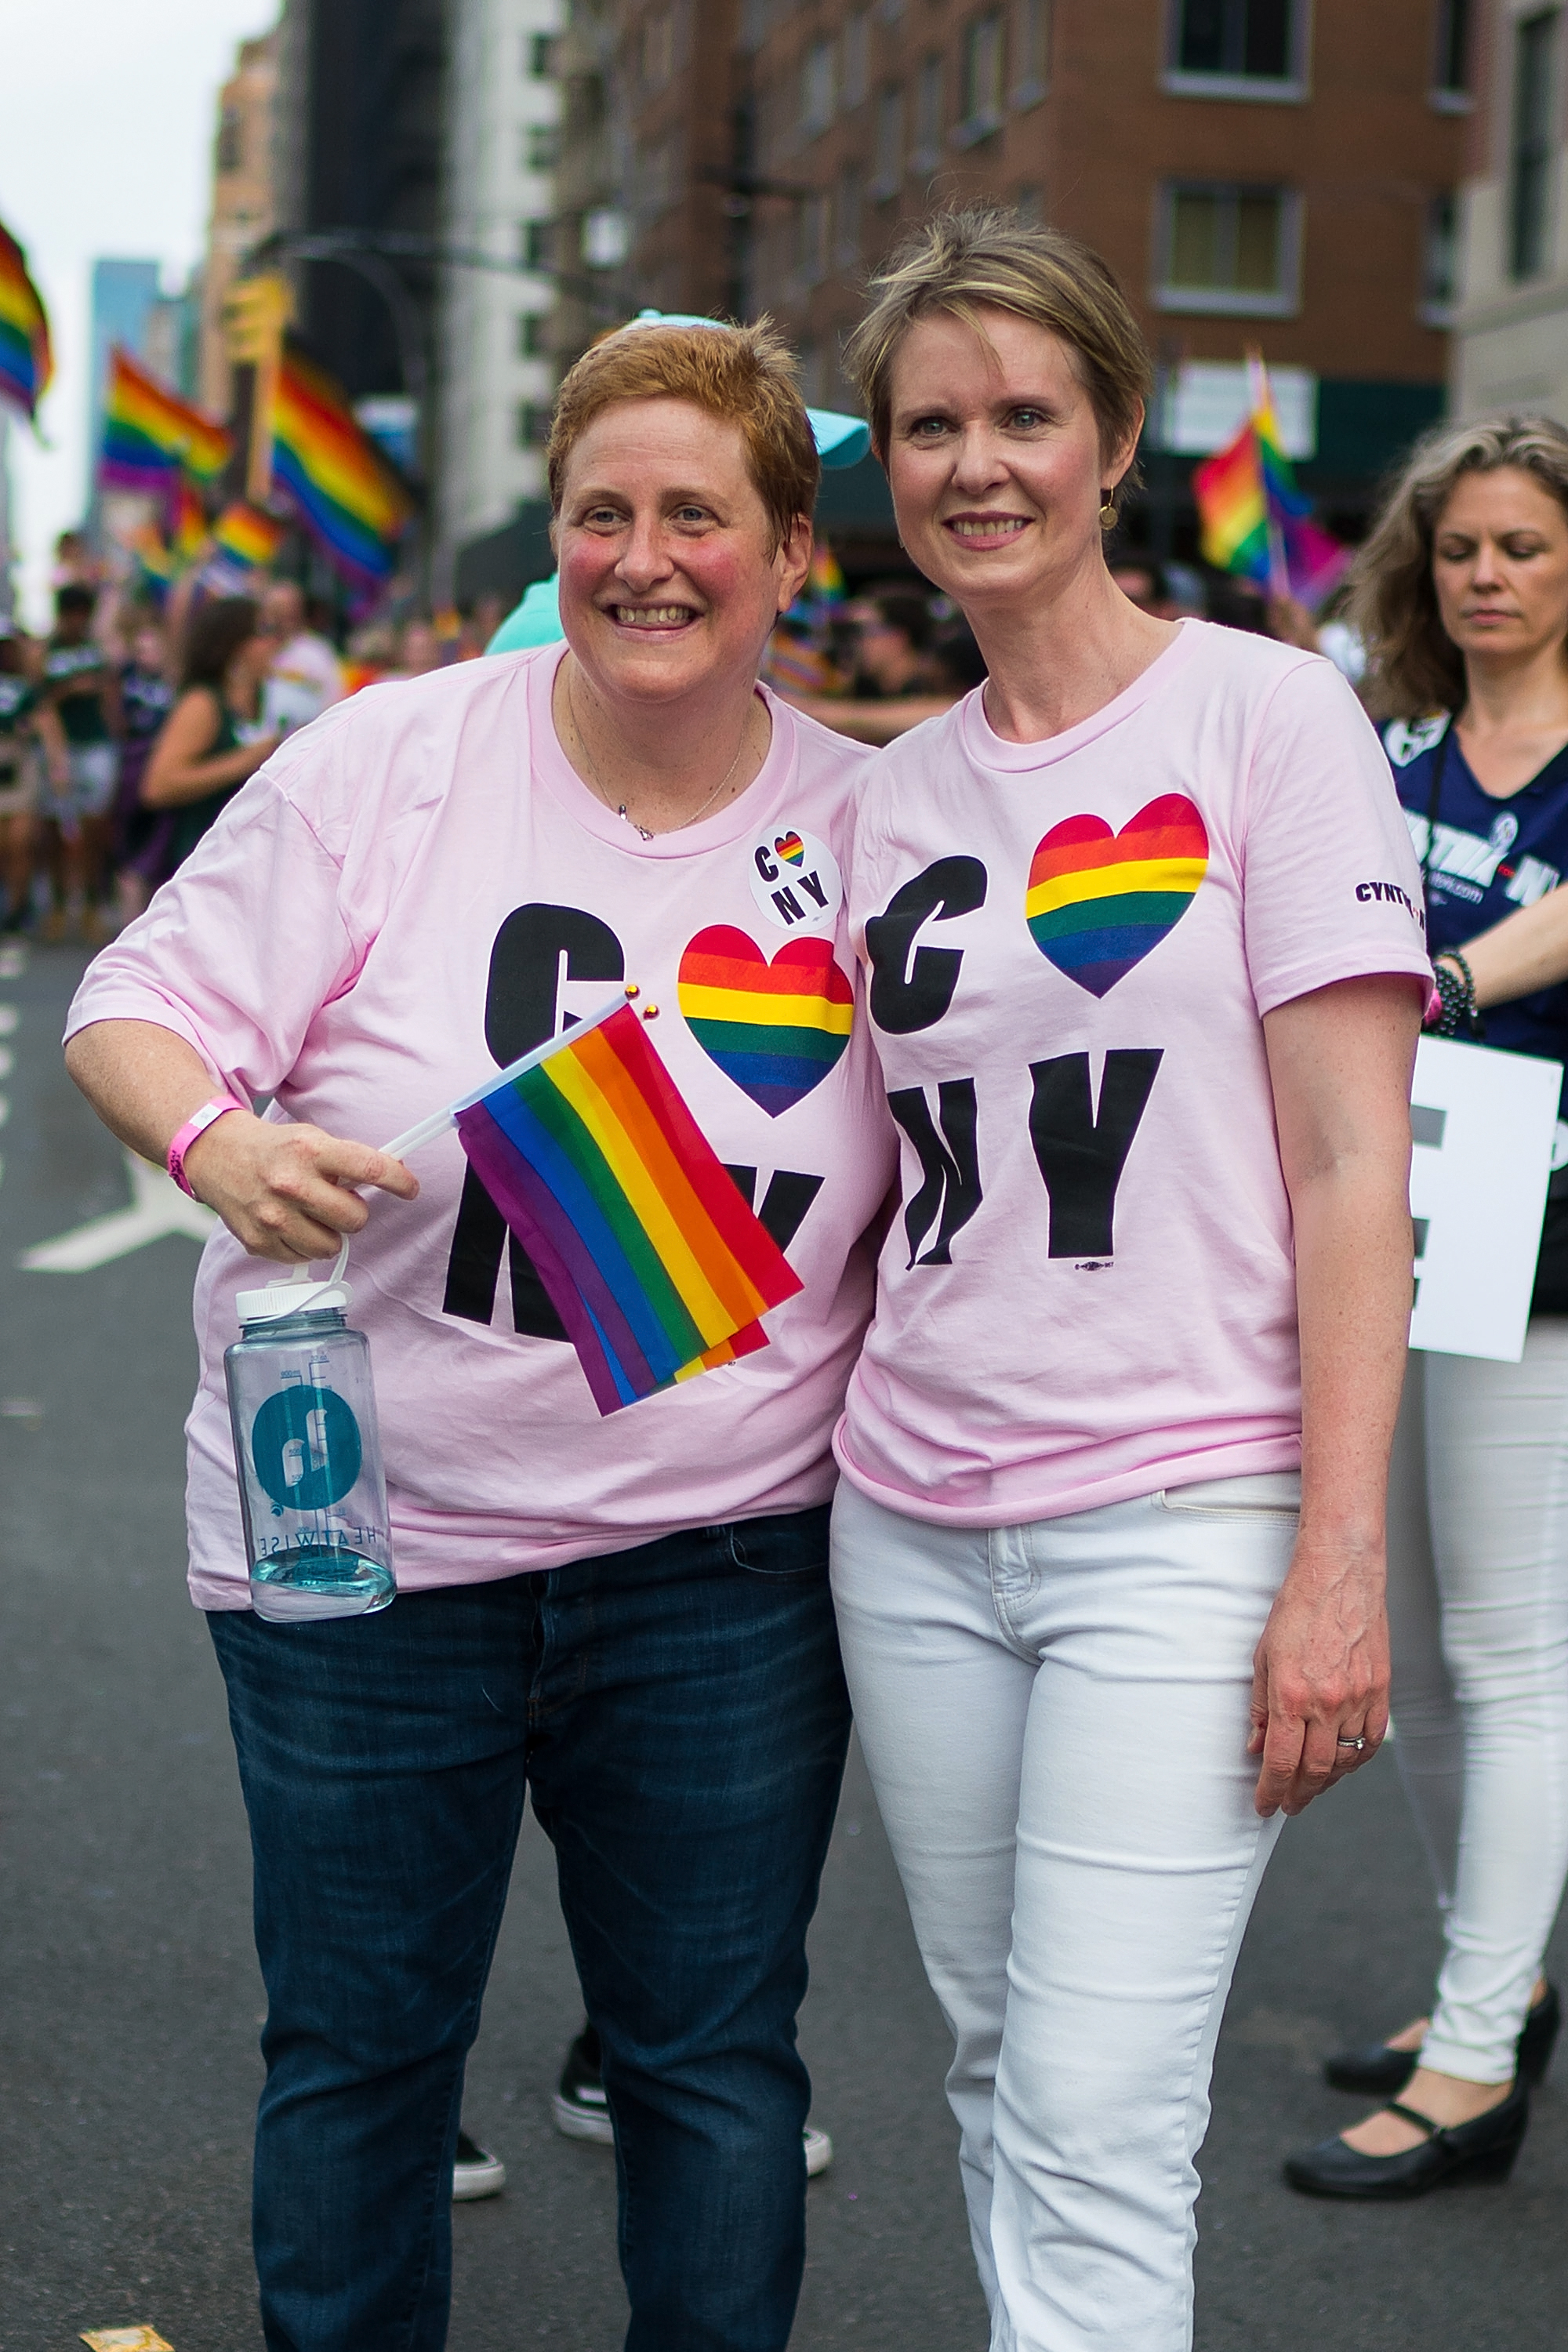 Close-up of Cynthia and Christine at a Pride event